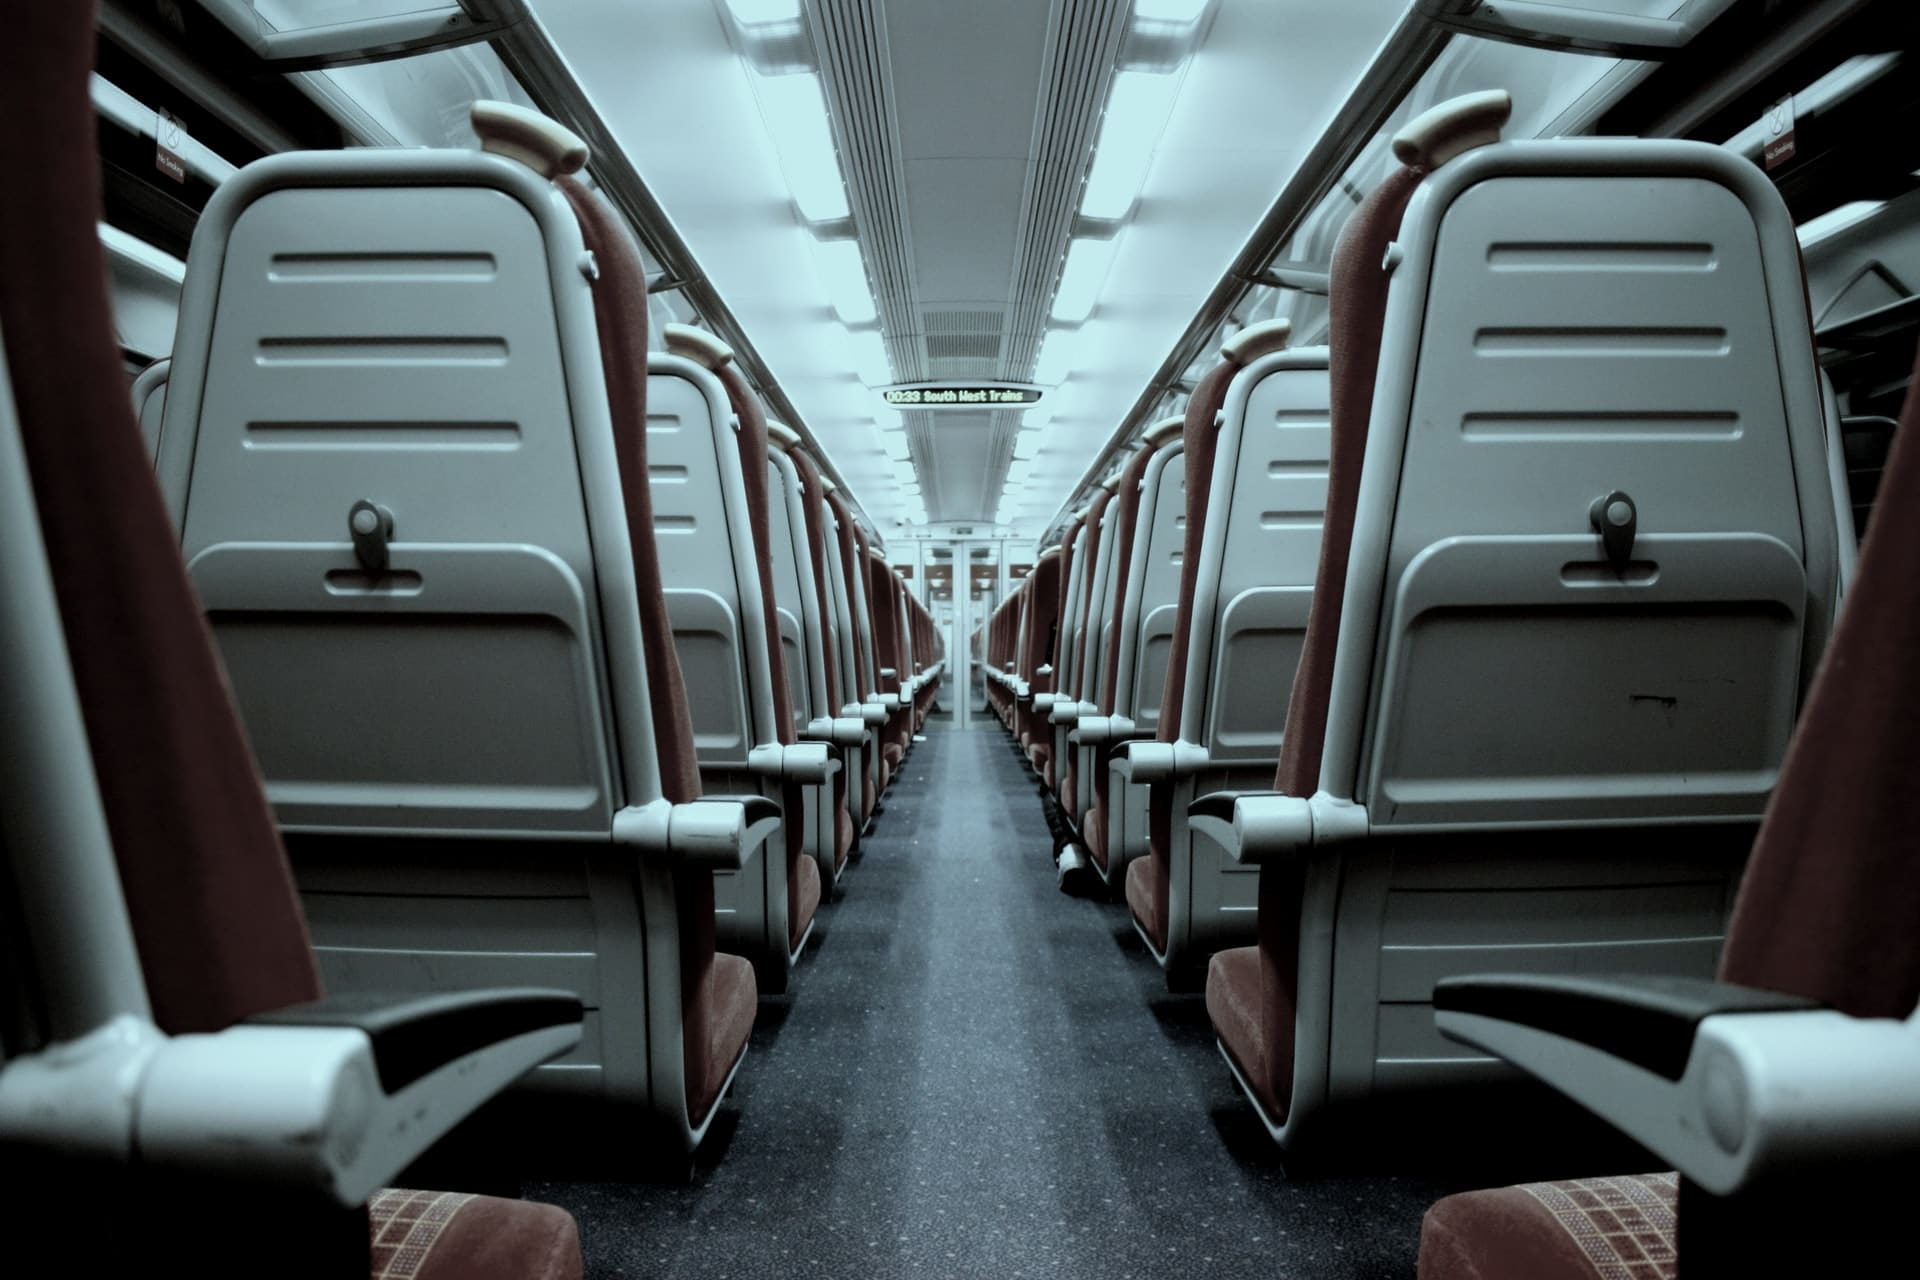 The interior of an airplane representing the risk of flying during the holdiays